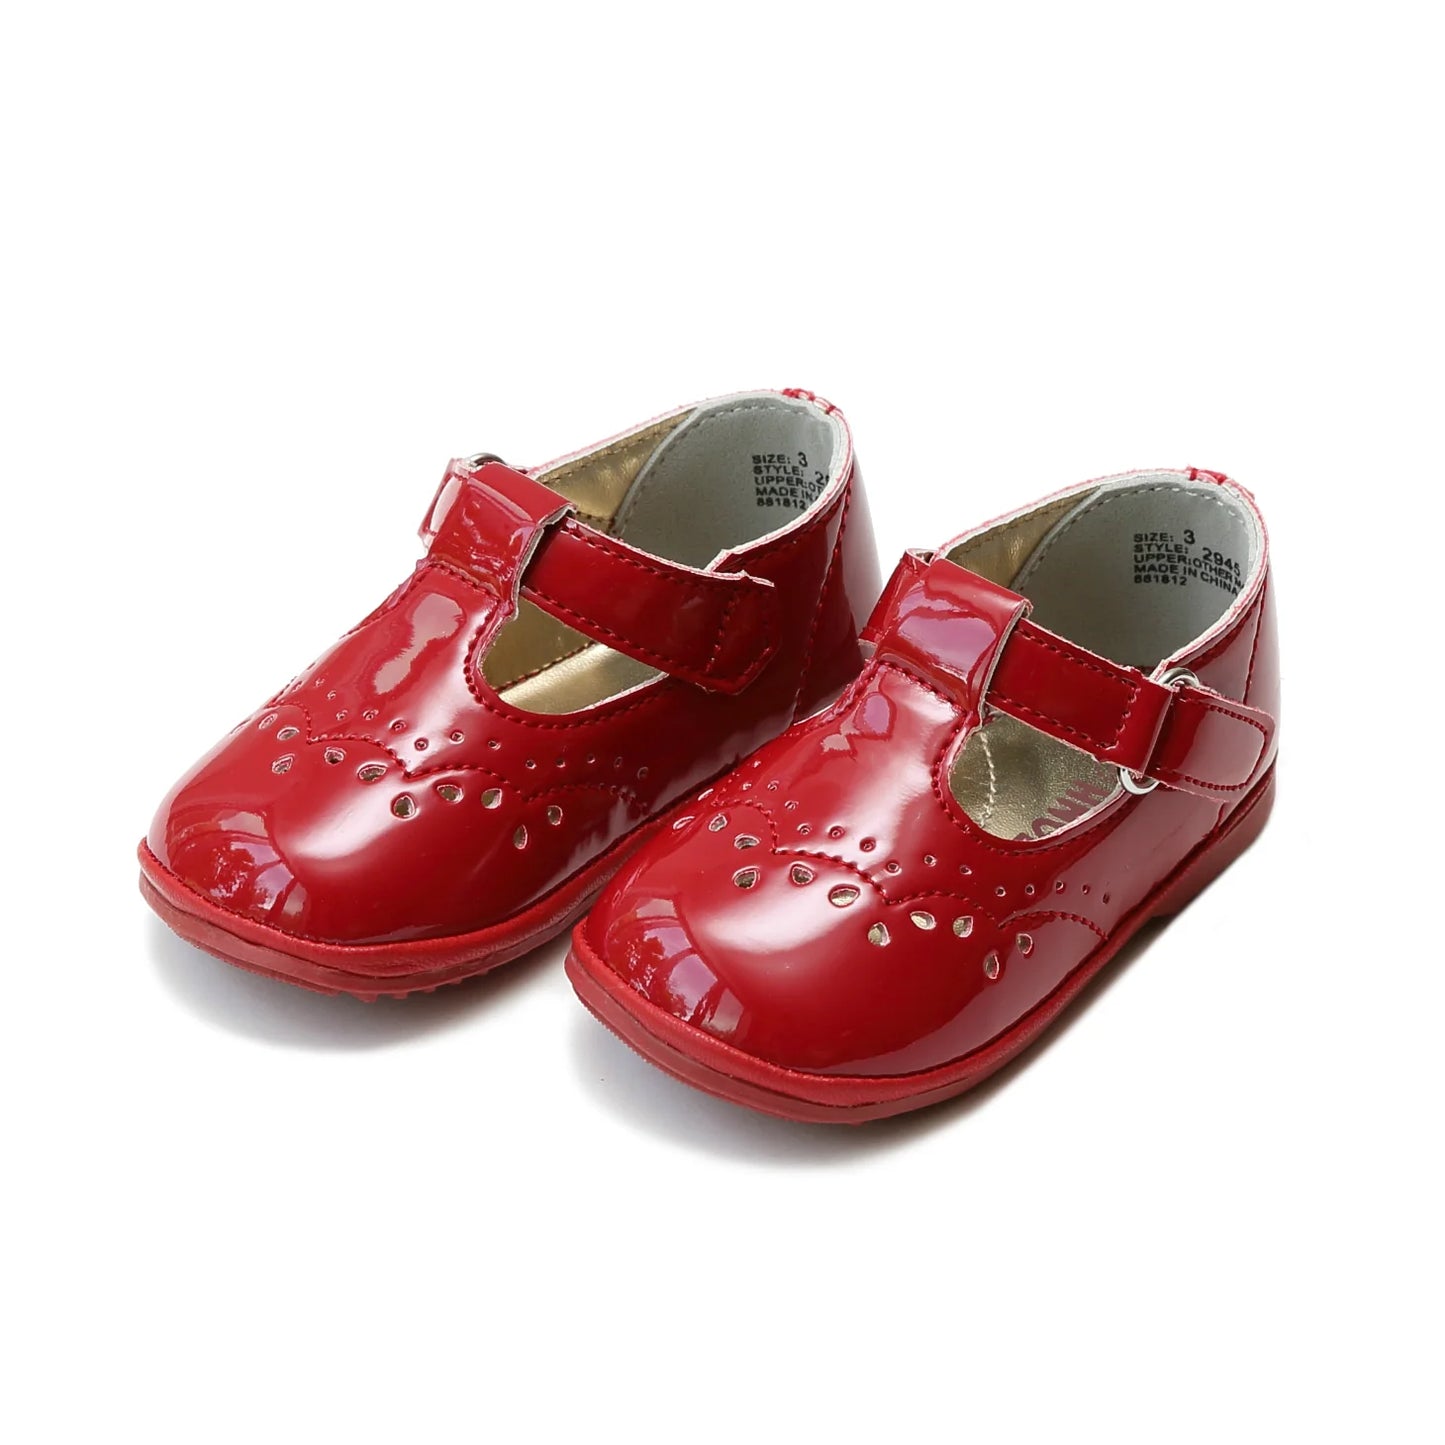 L'Amour - Birdie Patent Red T-Strap Mary Jane